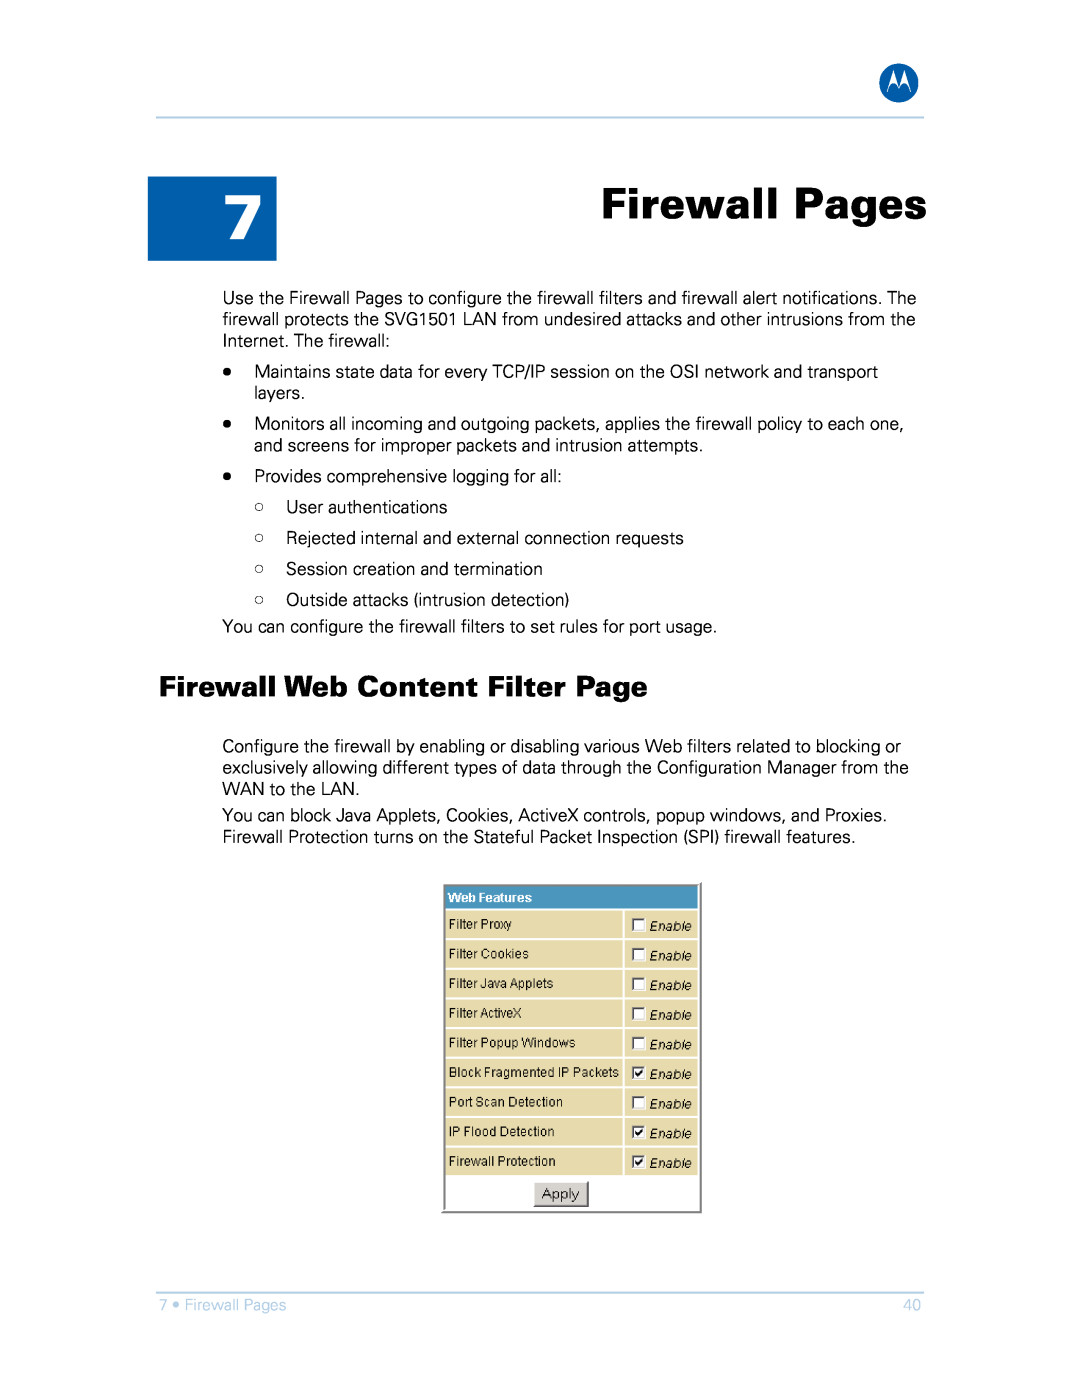 Motorola SVG1501UE, SVG1501E manual Firewall Pages, Firewall Web Content Filter Page 